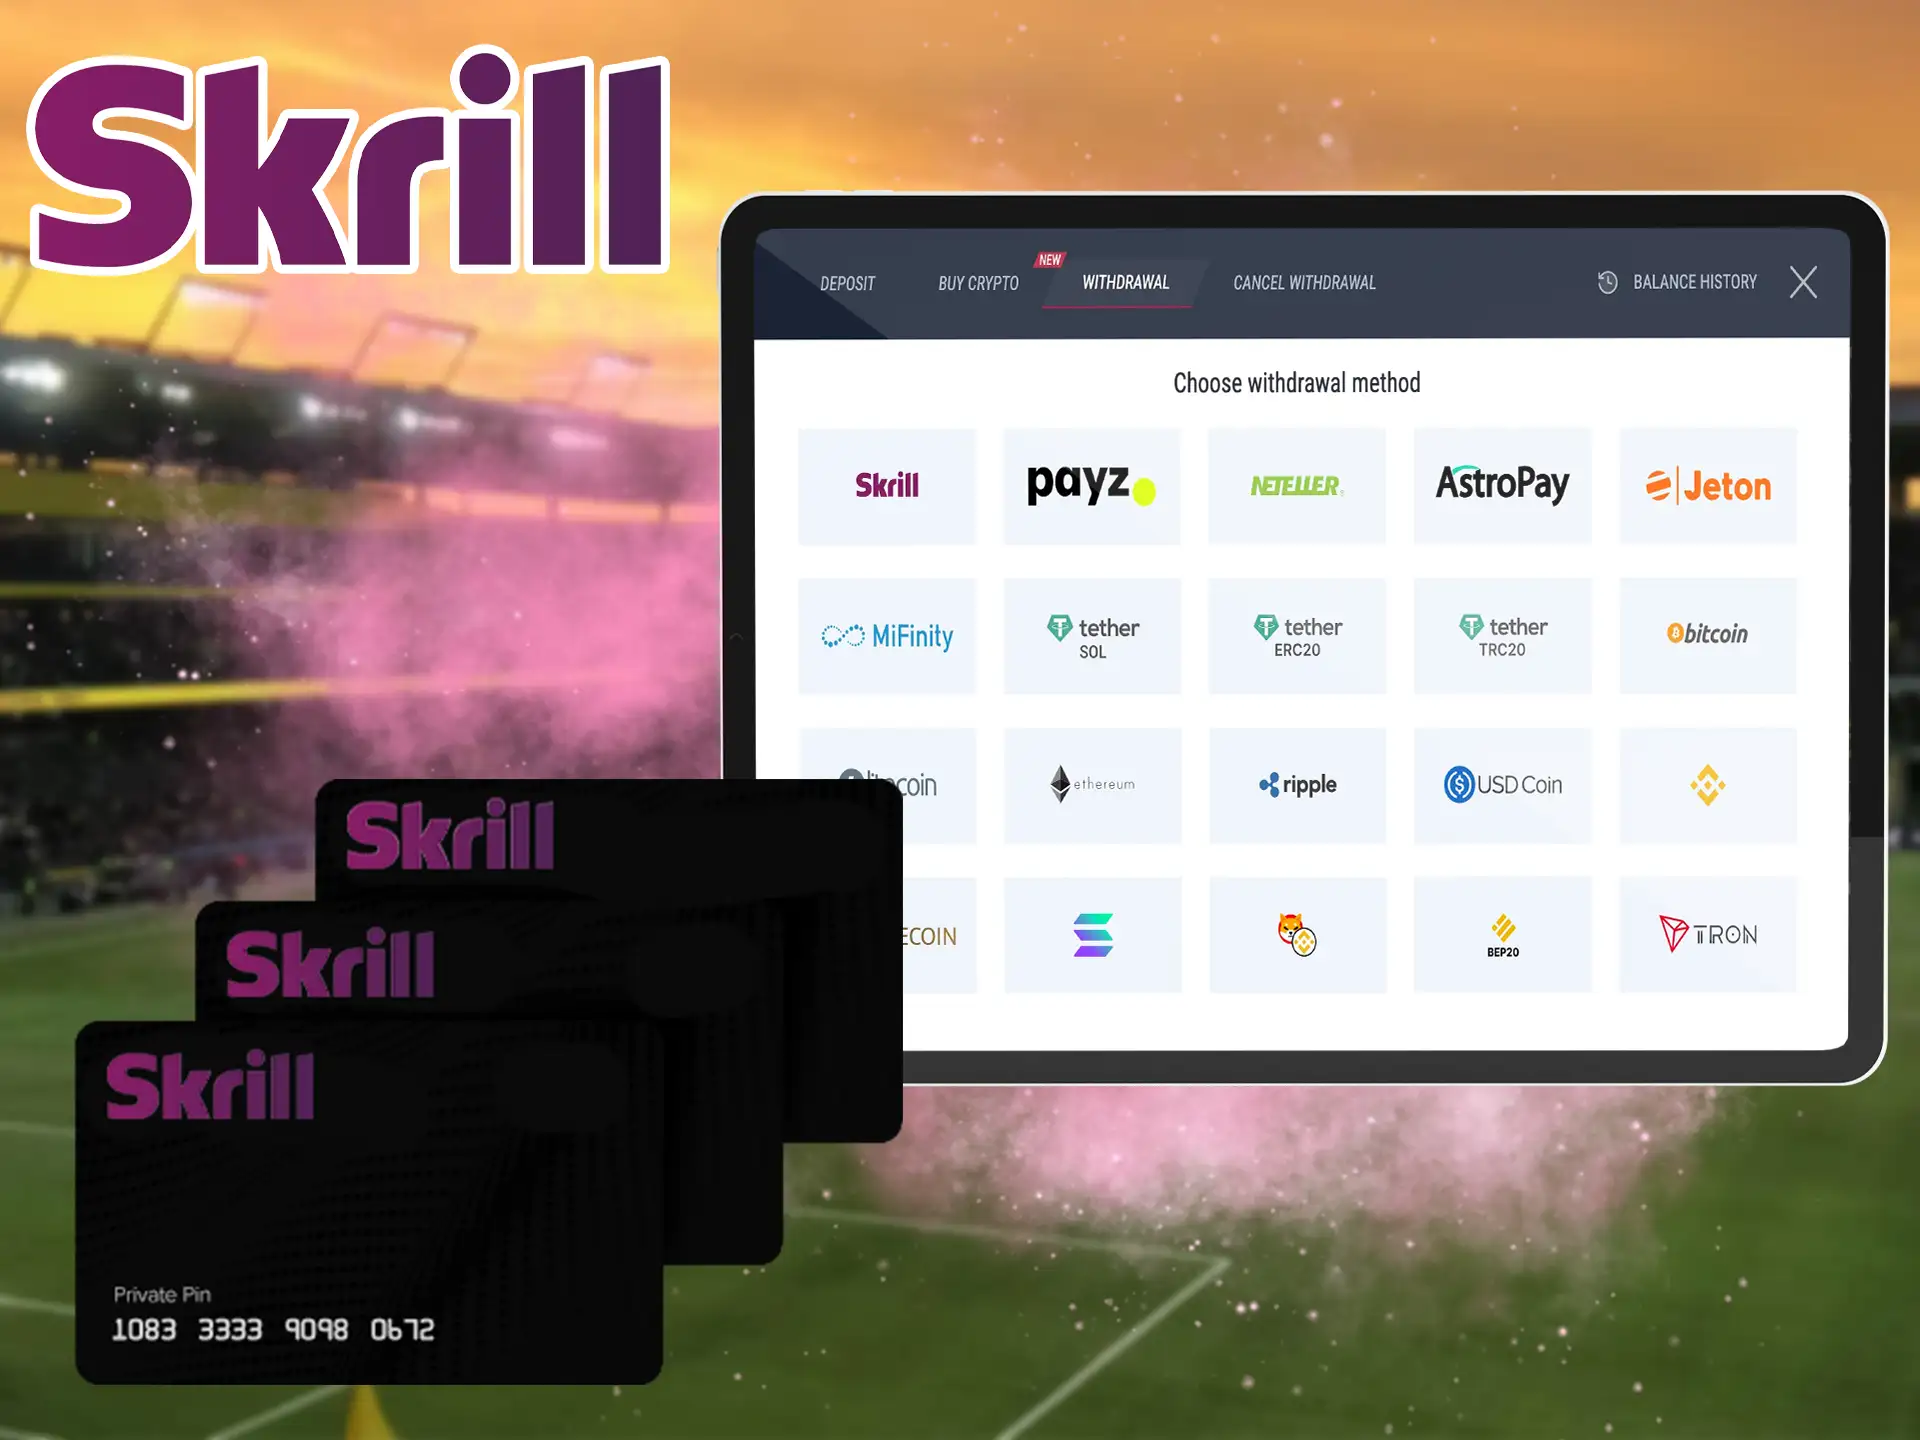 To receive your won funds you just need to choose from the available Skrill method on the bookmaker's website.